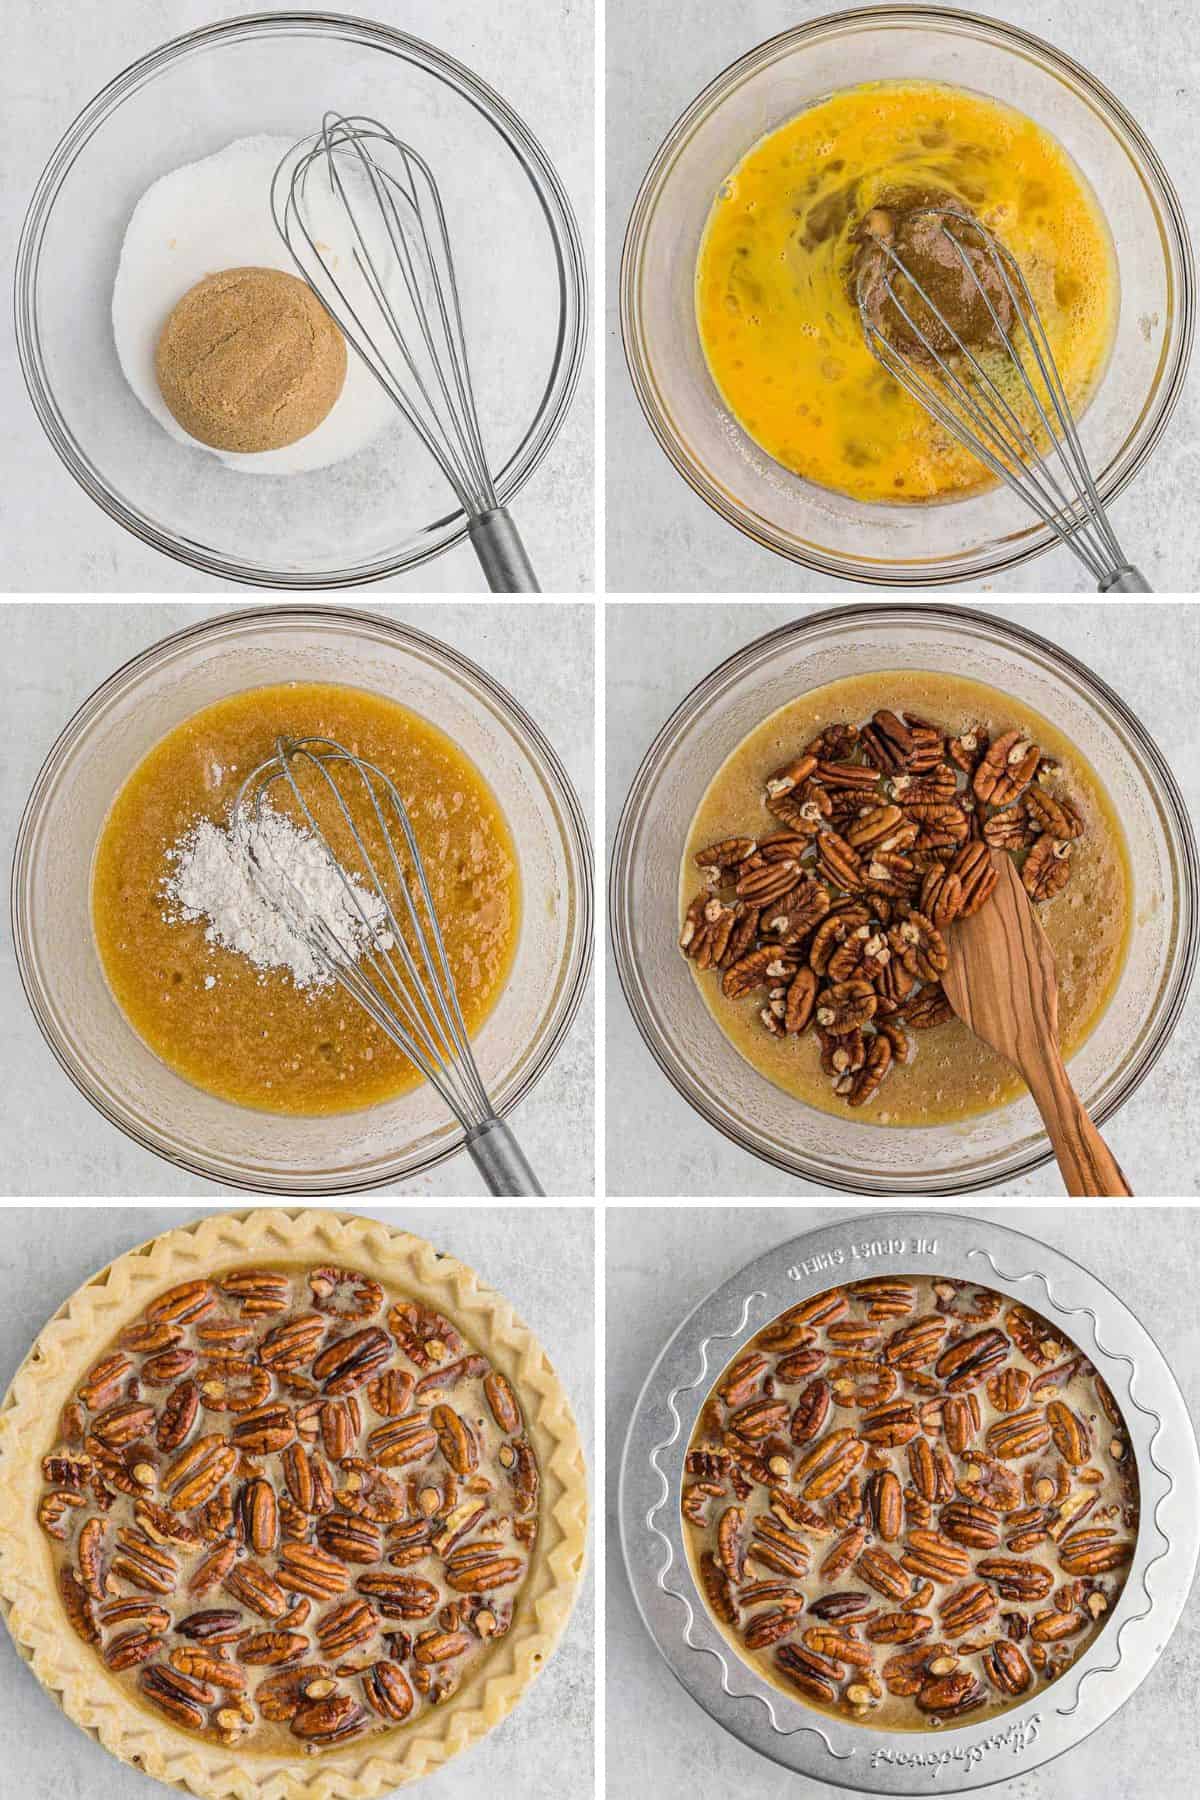 How to make a pecan pie 6 image step by step collage